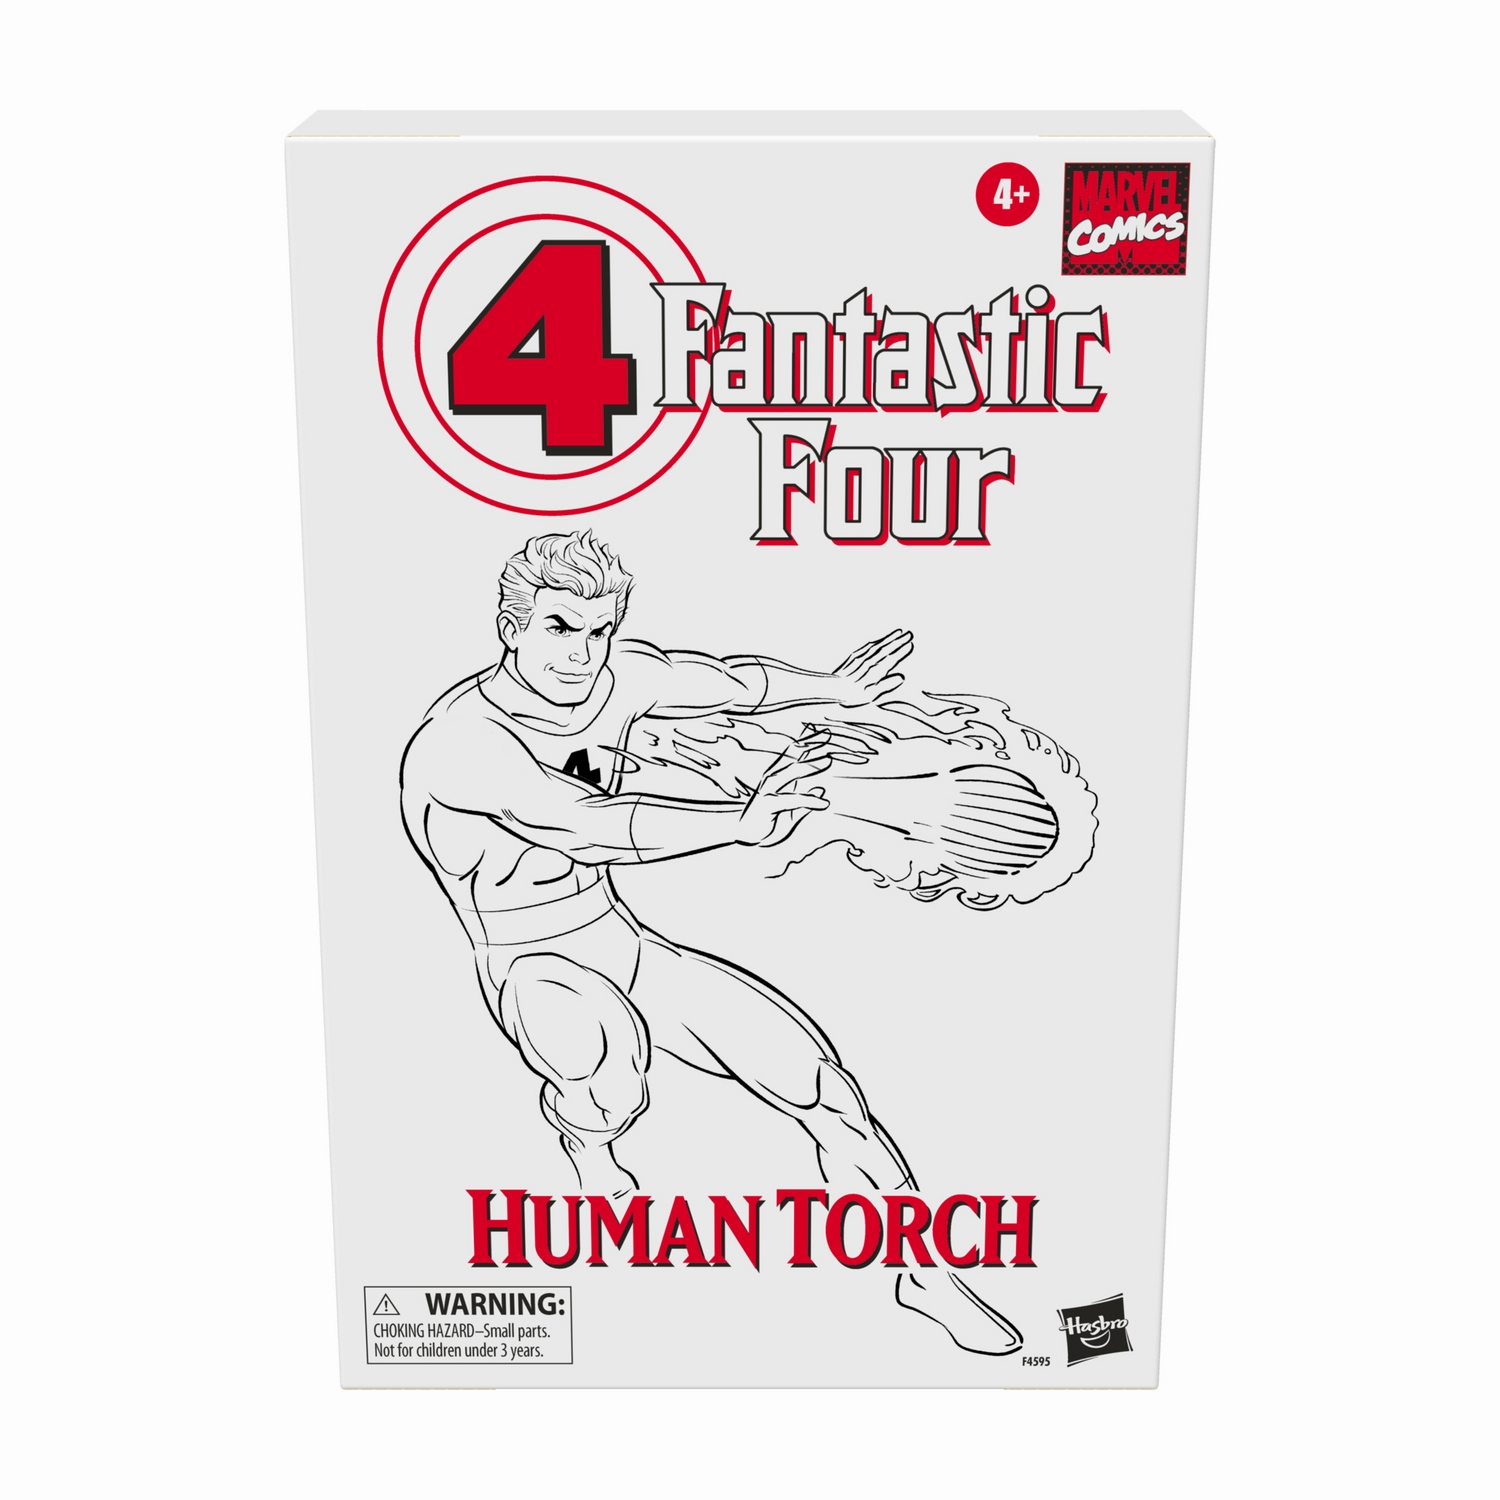 MARVEL LEGENDS SERIES 6-INCH RETRO FANTASTIC FOUR THE HUMAN TORCH Figure (Powered Down)_pckging 1.jpg